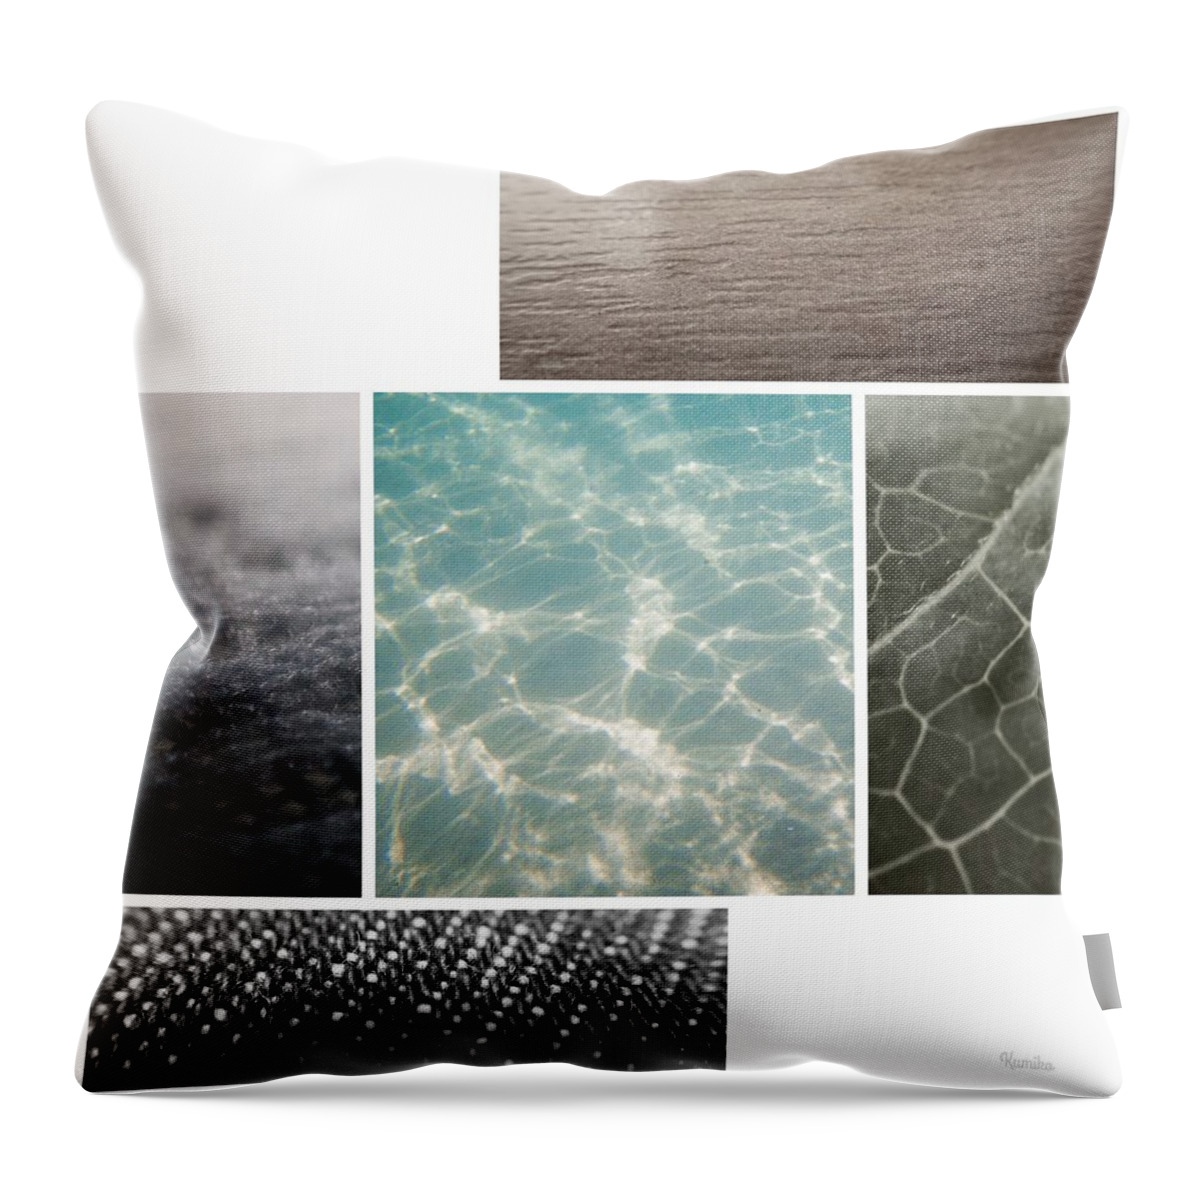 Art Photo Throw Pillow featuring the photograph Feature by Kumiko Izumi